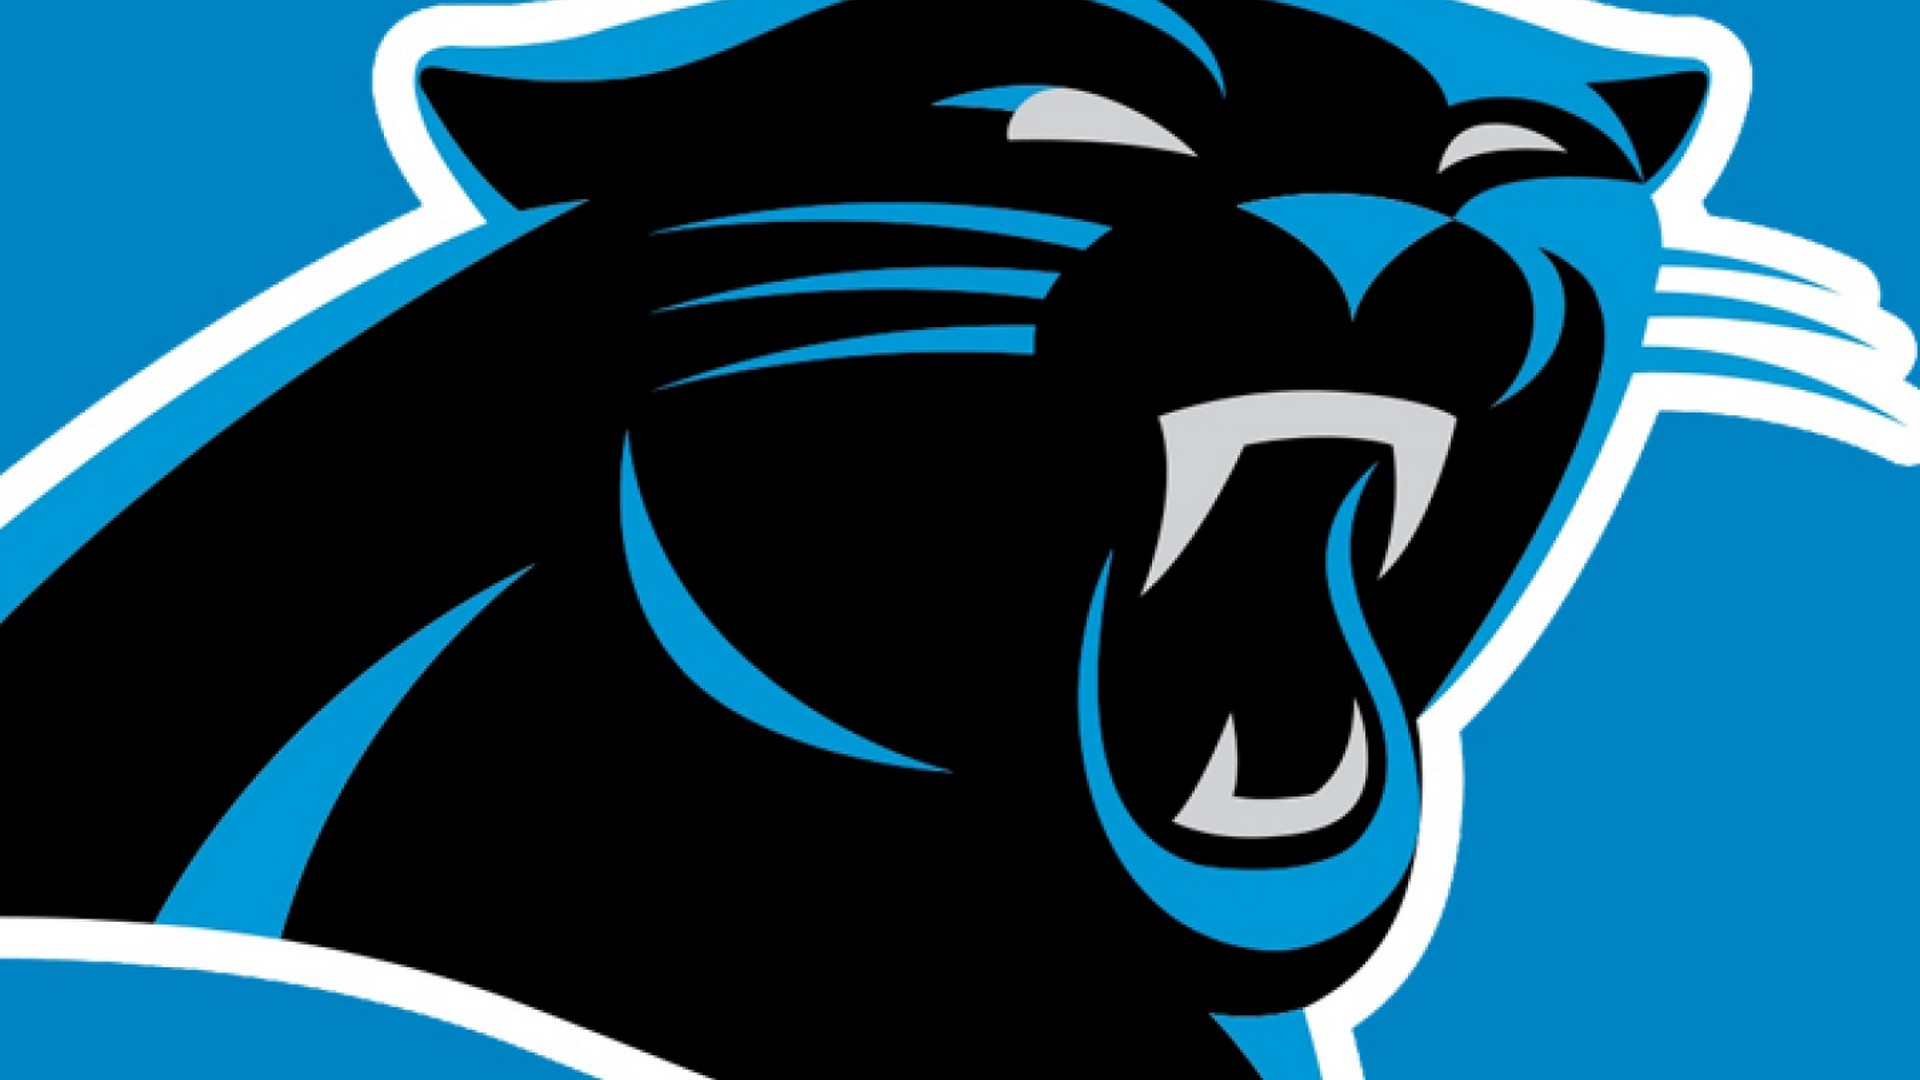 Wallpapers Carolina Panthers With Resolution 1920X1080